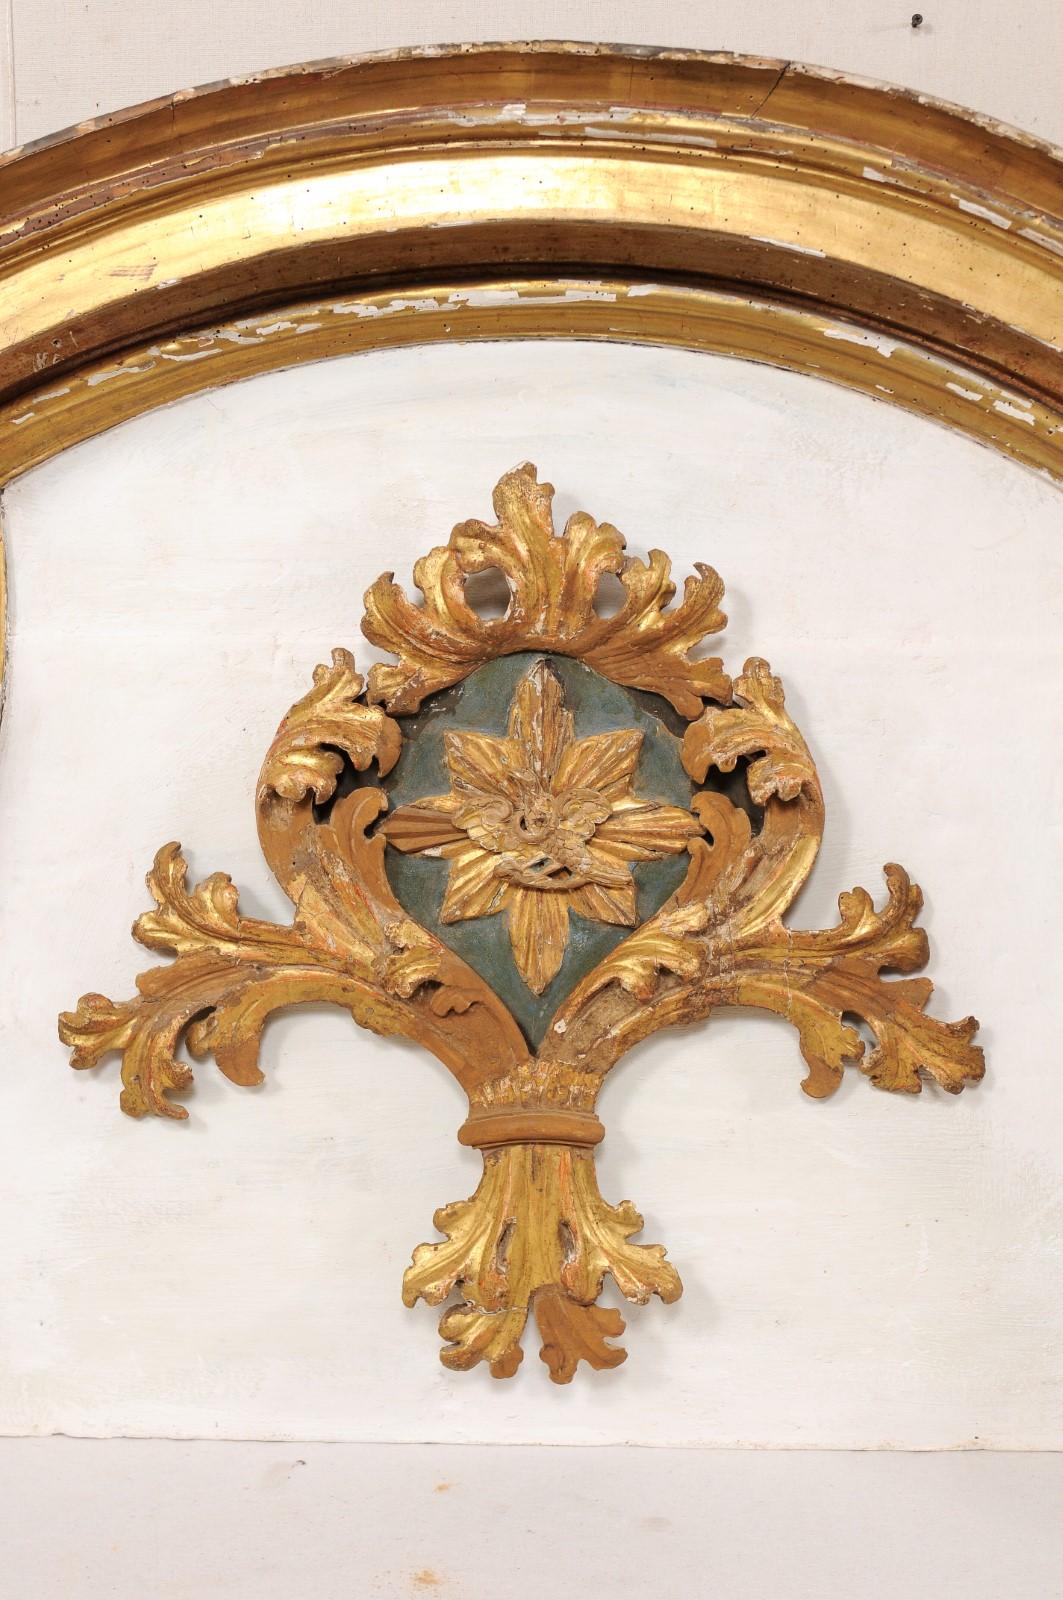 Impressive 18th Century Italian Carved, Gilded & Painted Wood Pediment Fragment For Sale 1